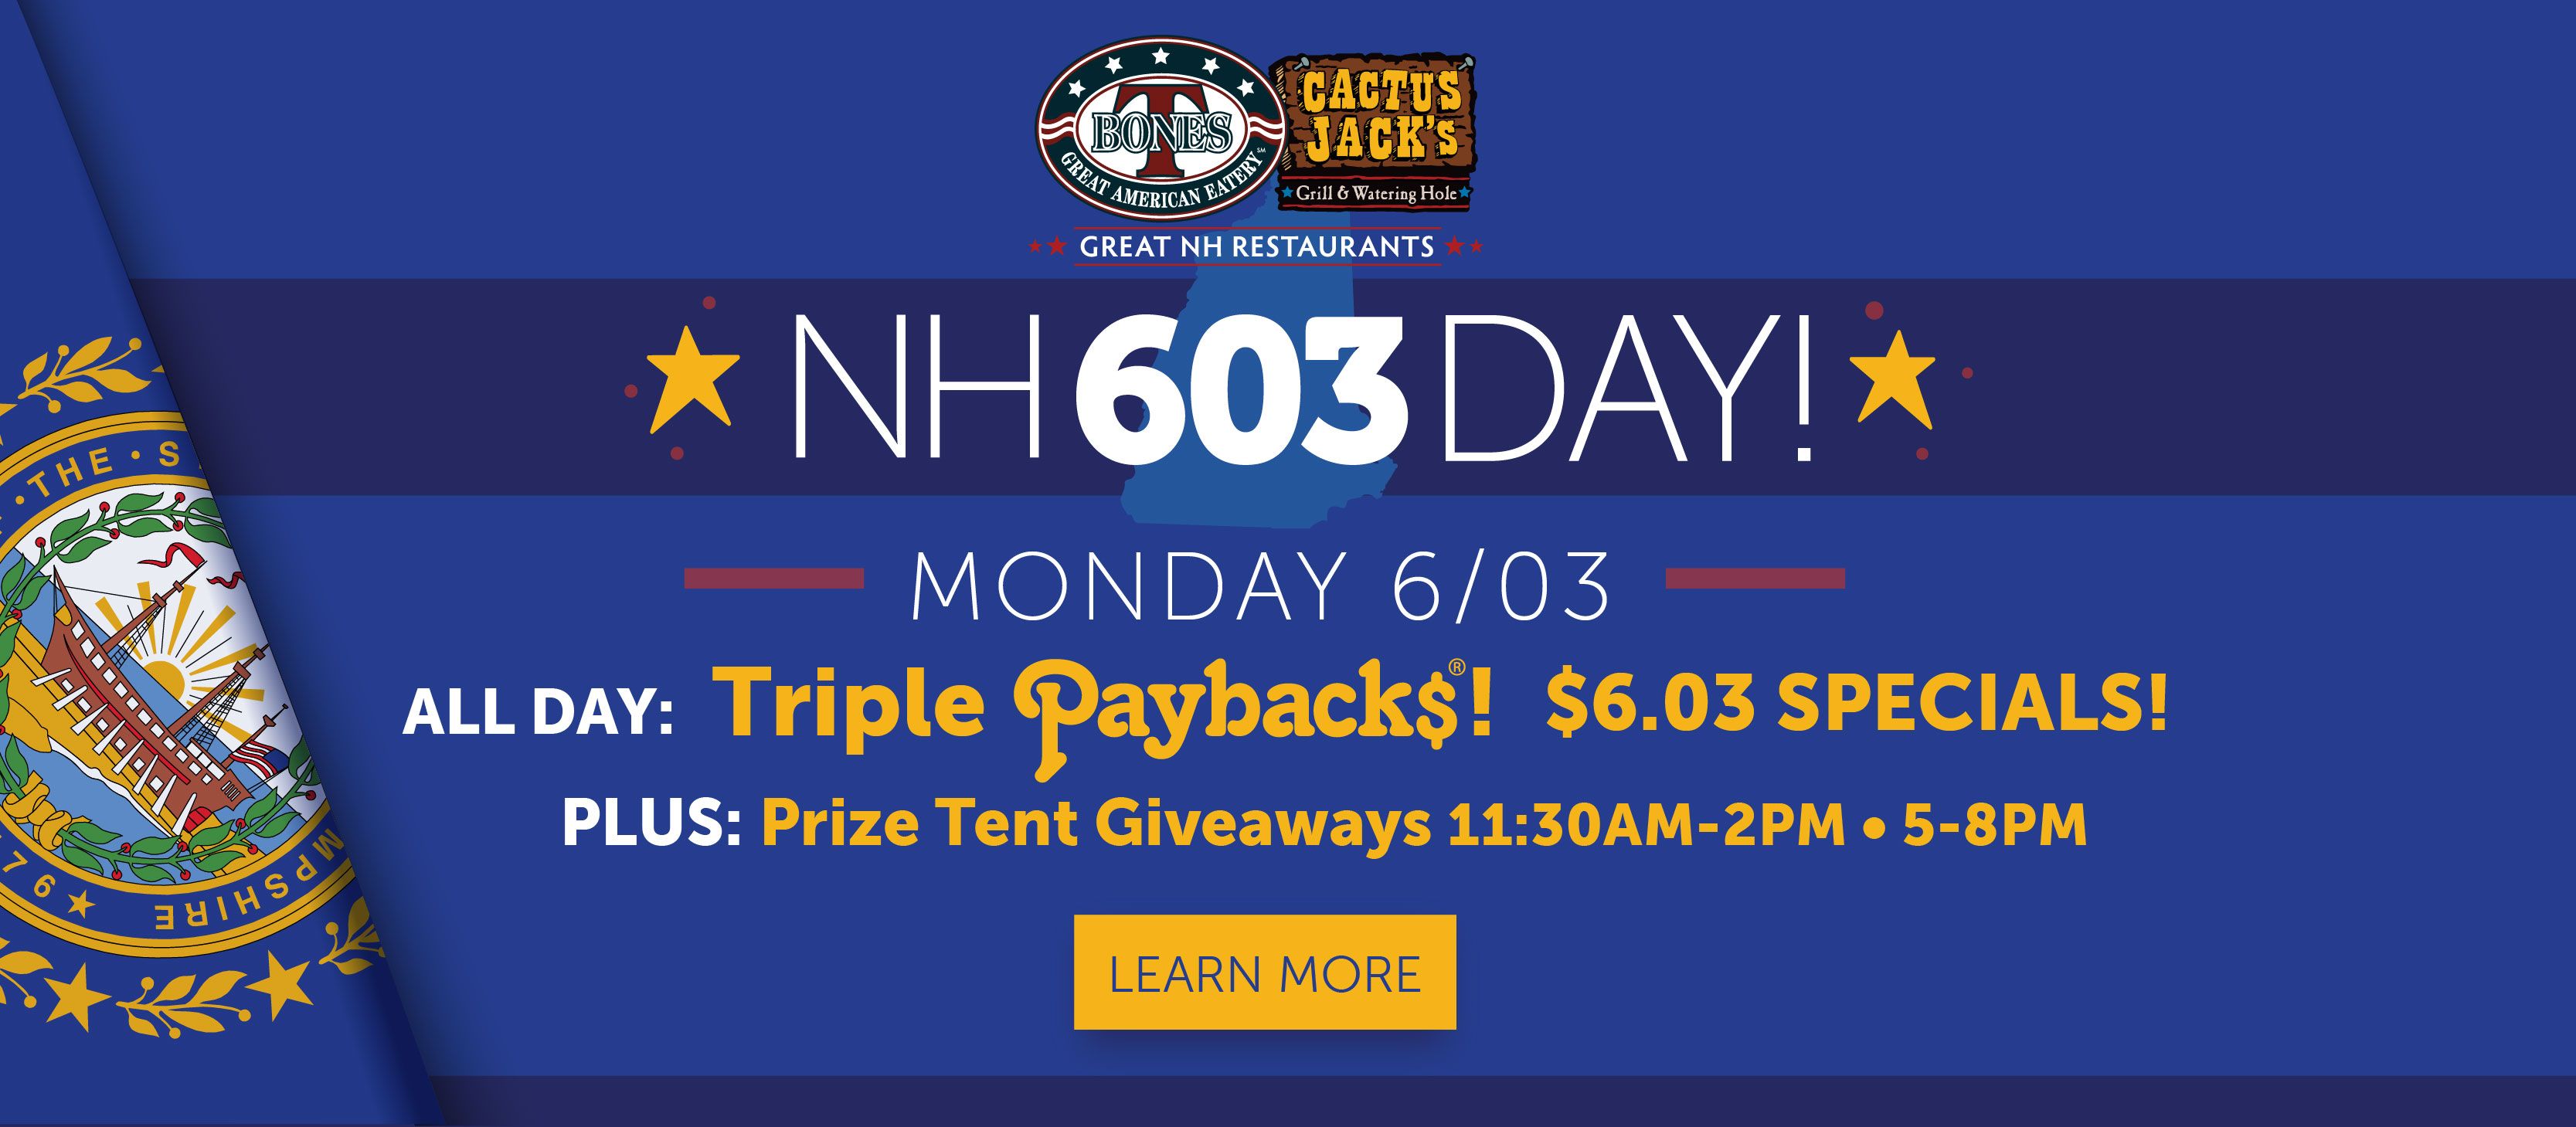 T-BONES and Cactus Jack’s will celebrate NH 603 Day